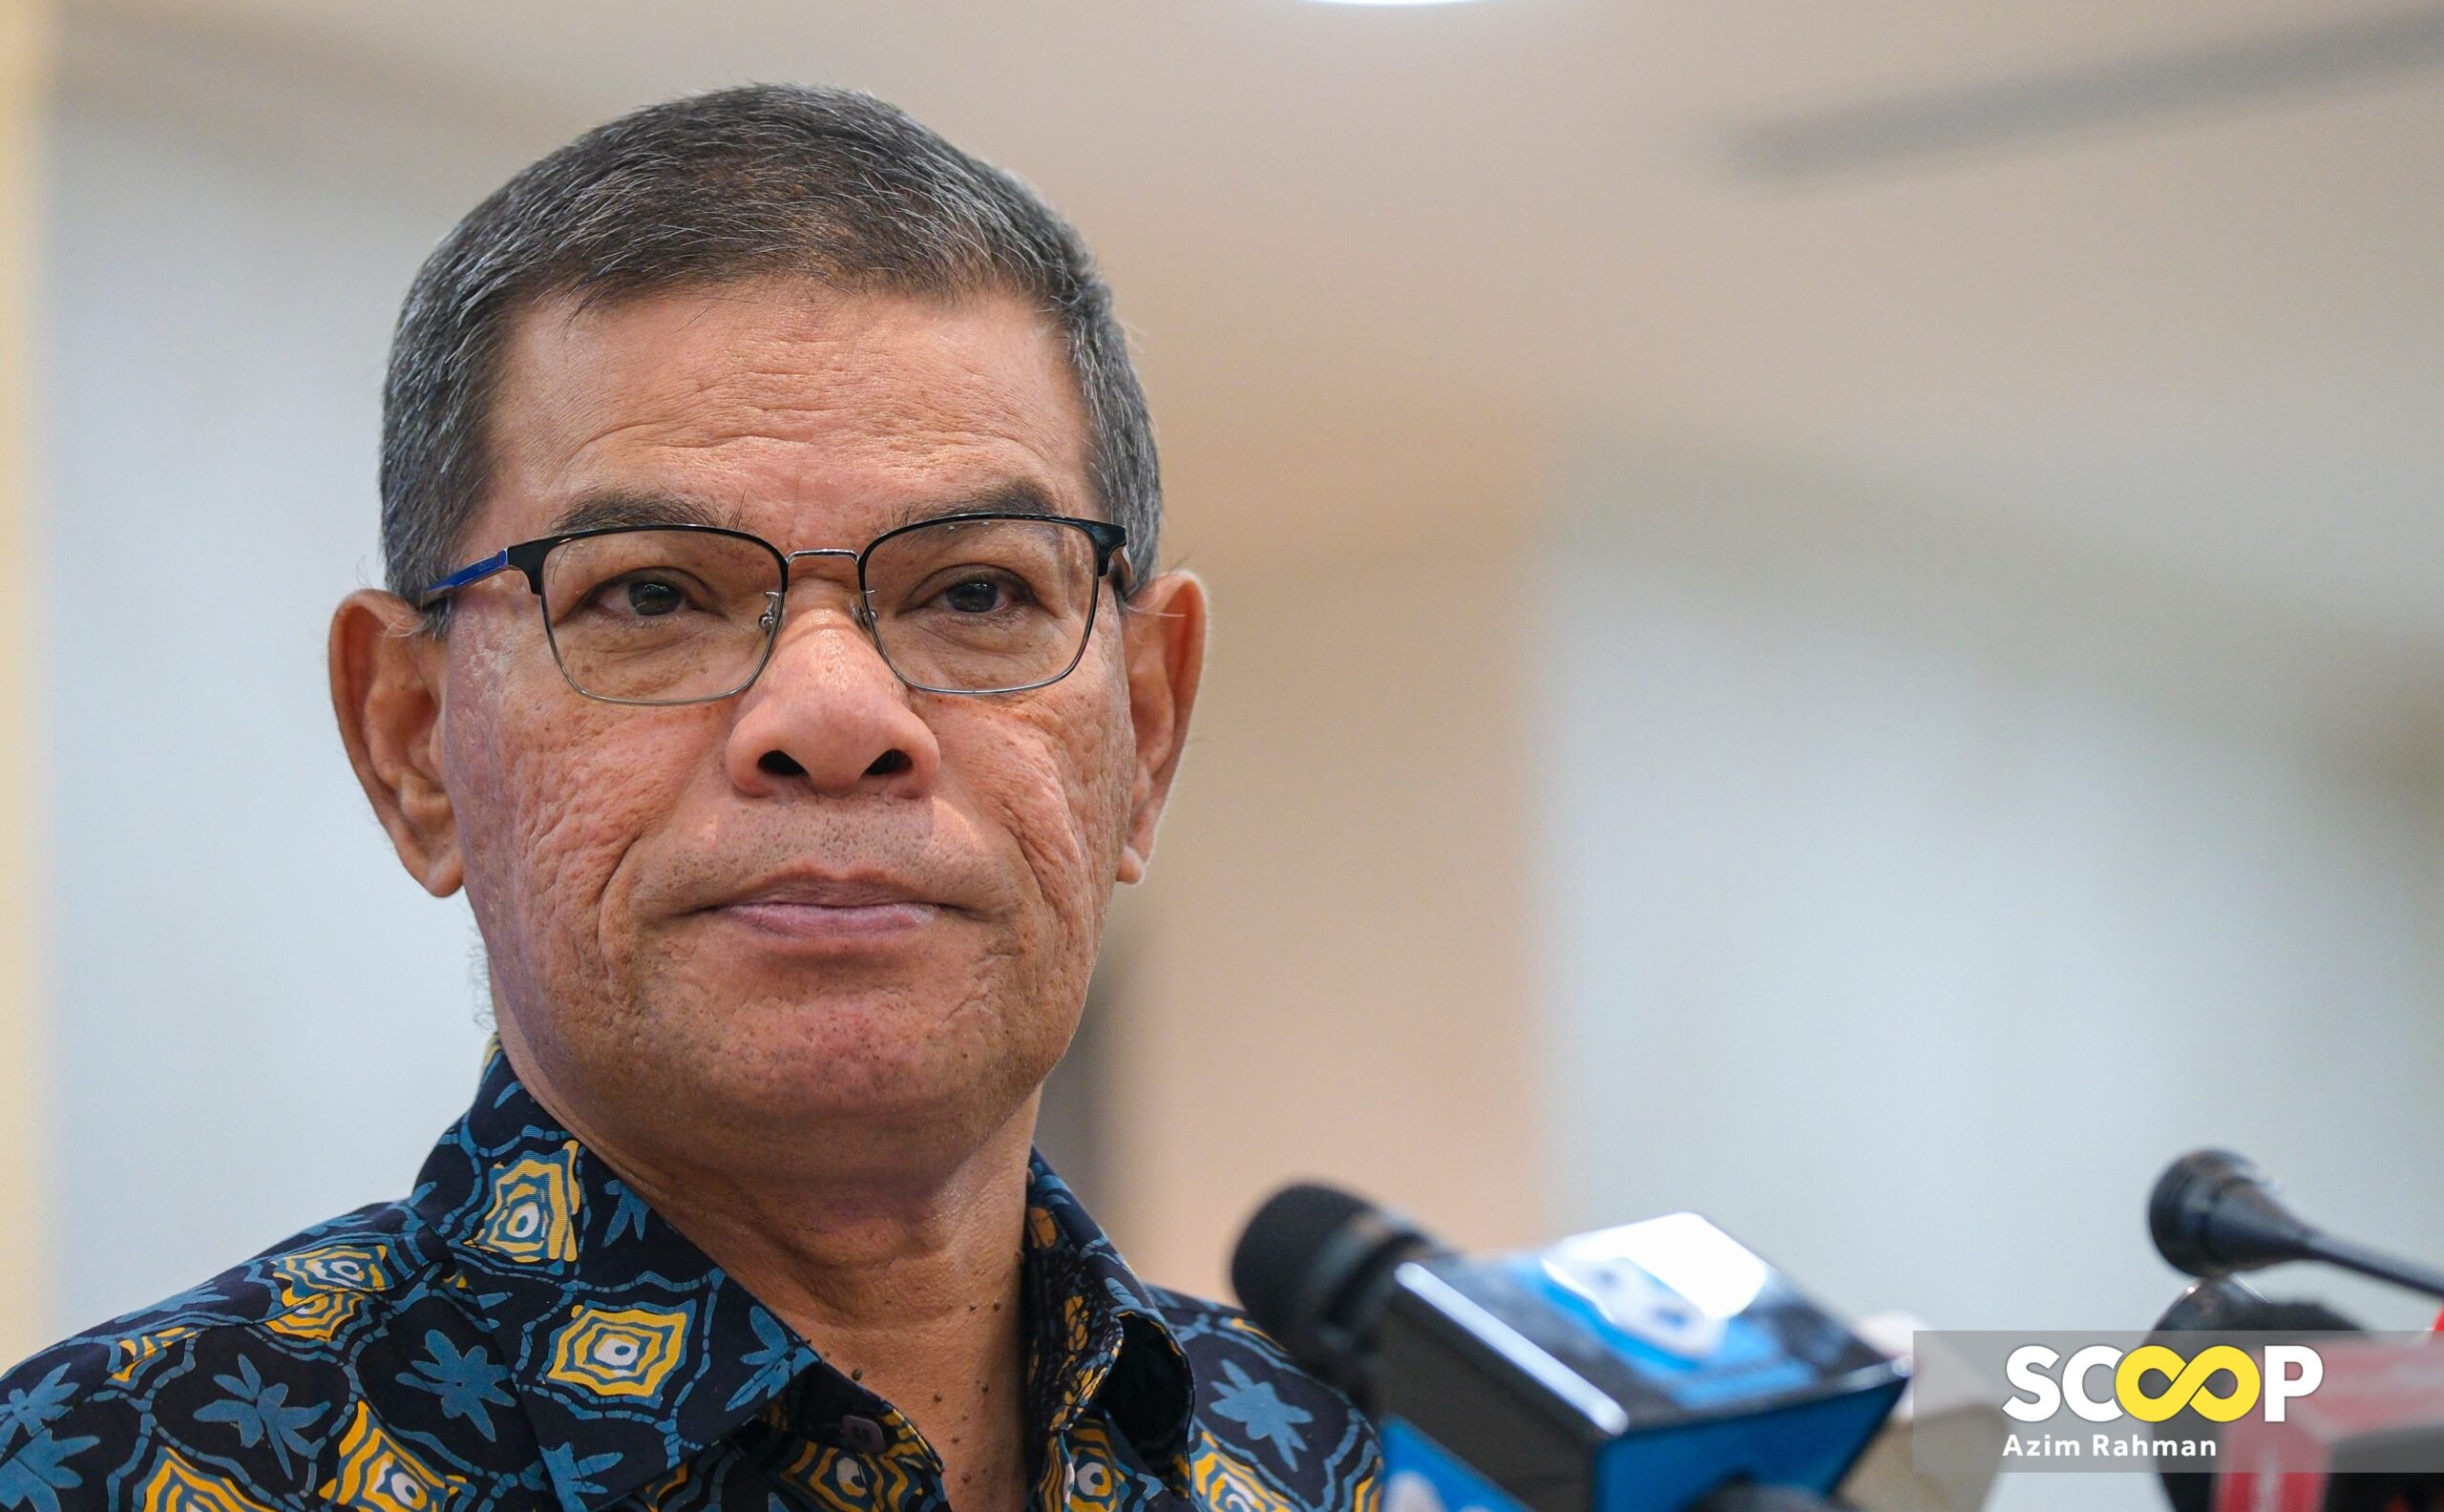 Random or planned? Police probing for links in recent attacks, says Saifuddin